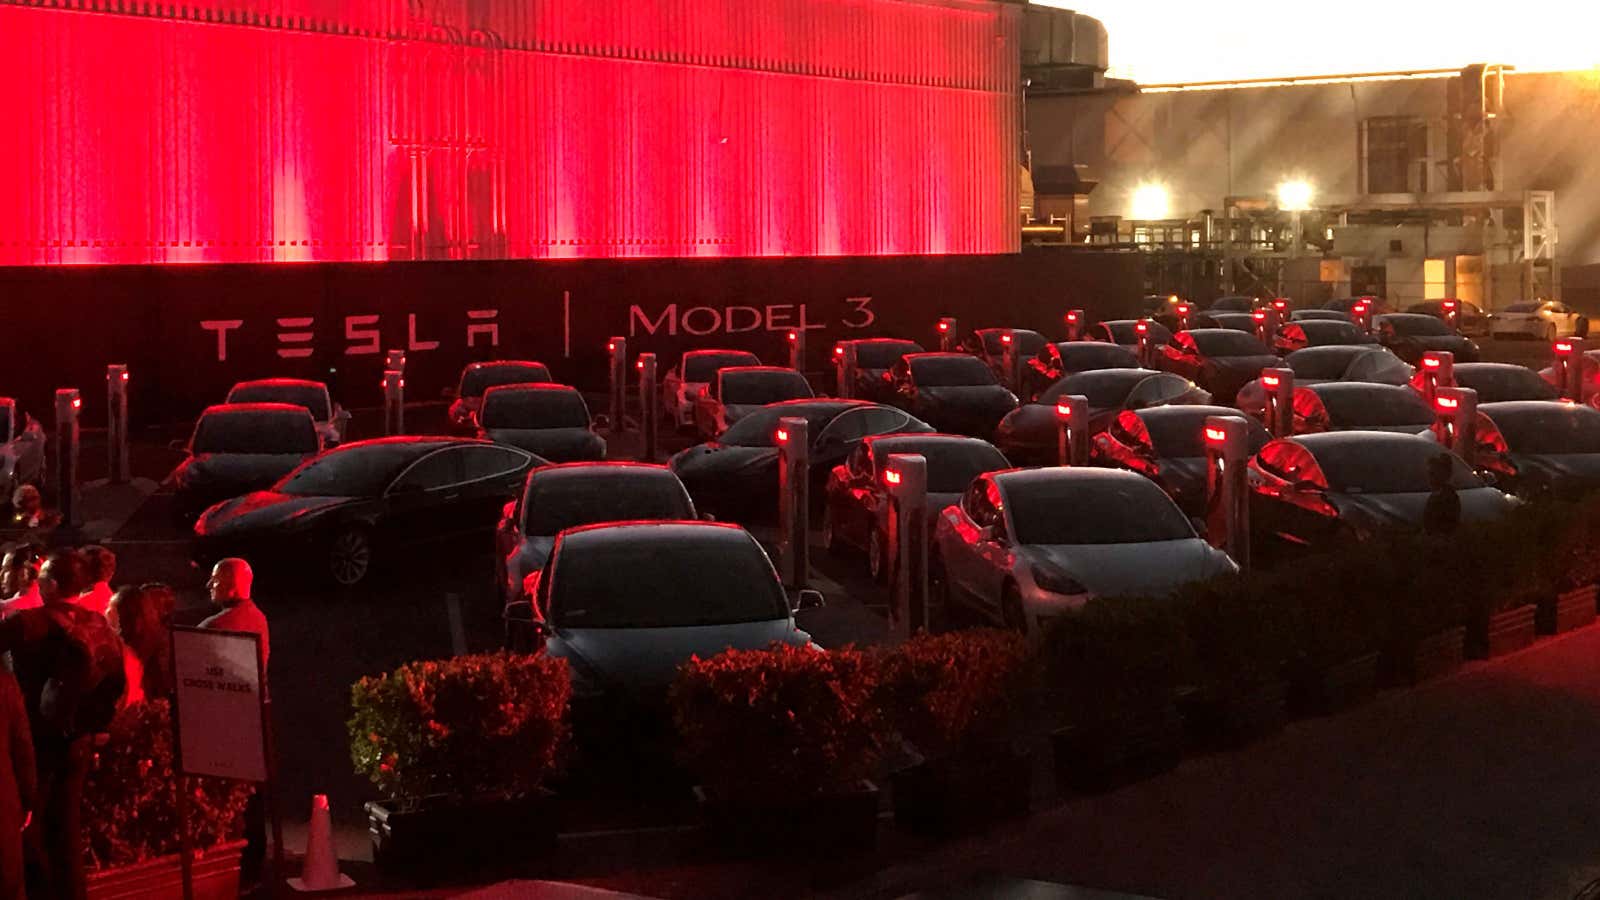 More Model 3s are needed.